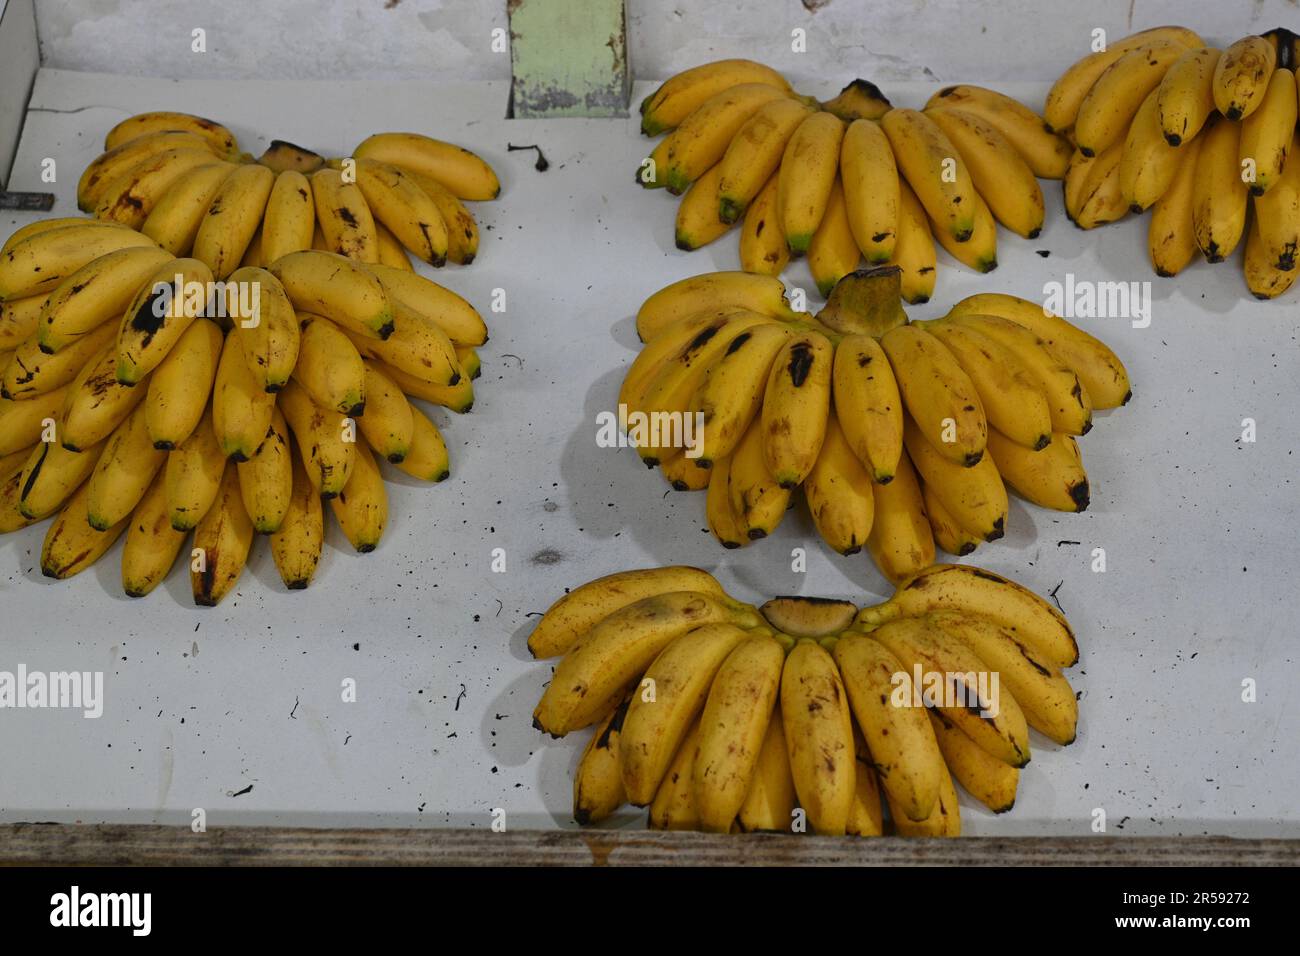 Golden Banana, Portuguese name Banana Ouro, for sale in a grocery store in Brazil Stock Photo